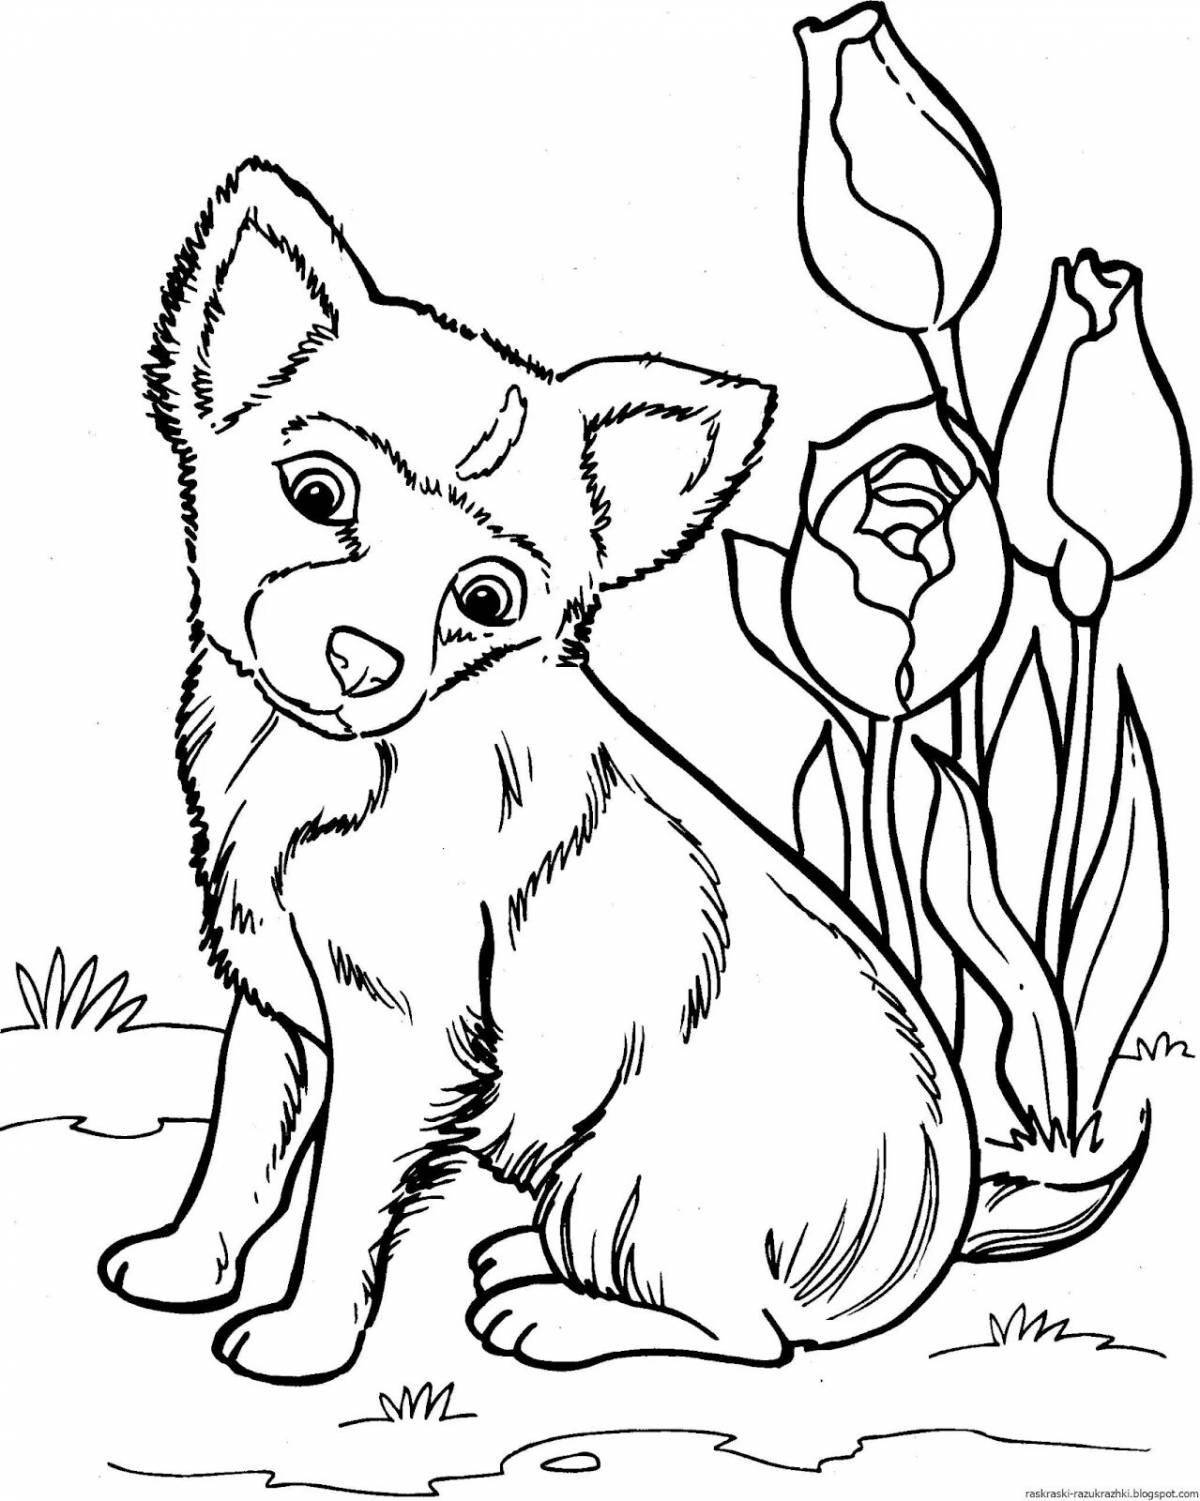 Adorable animal coloring pages for girls